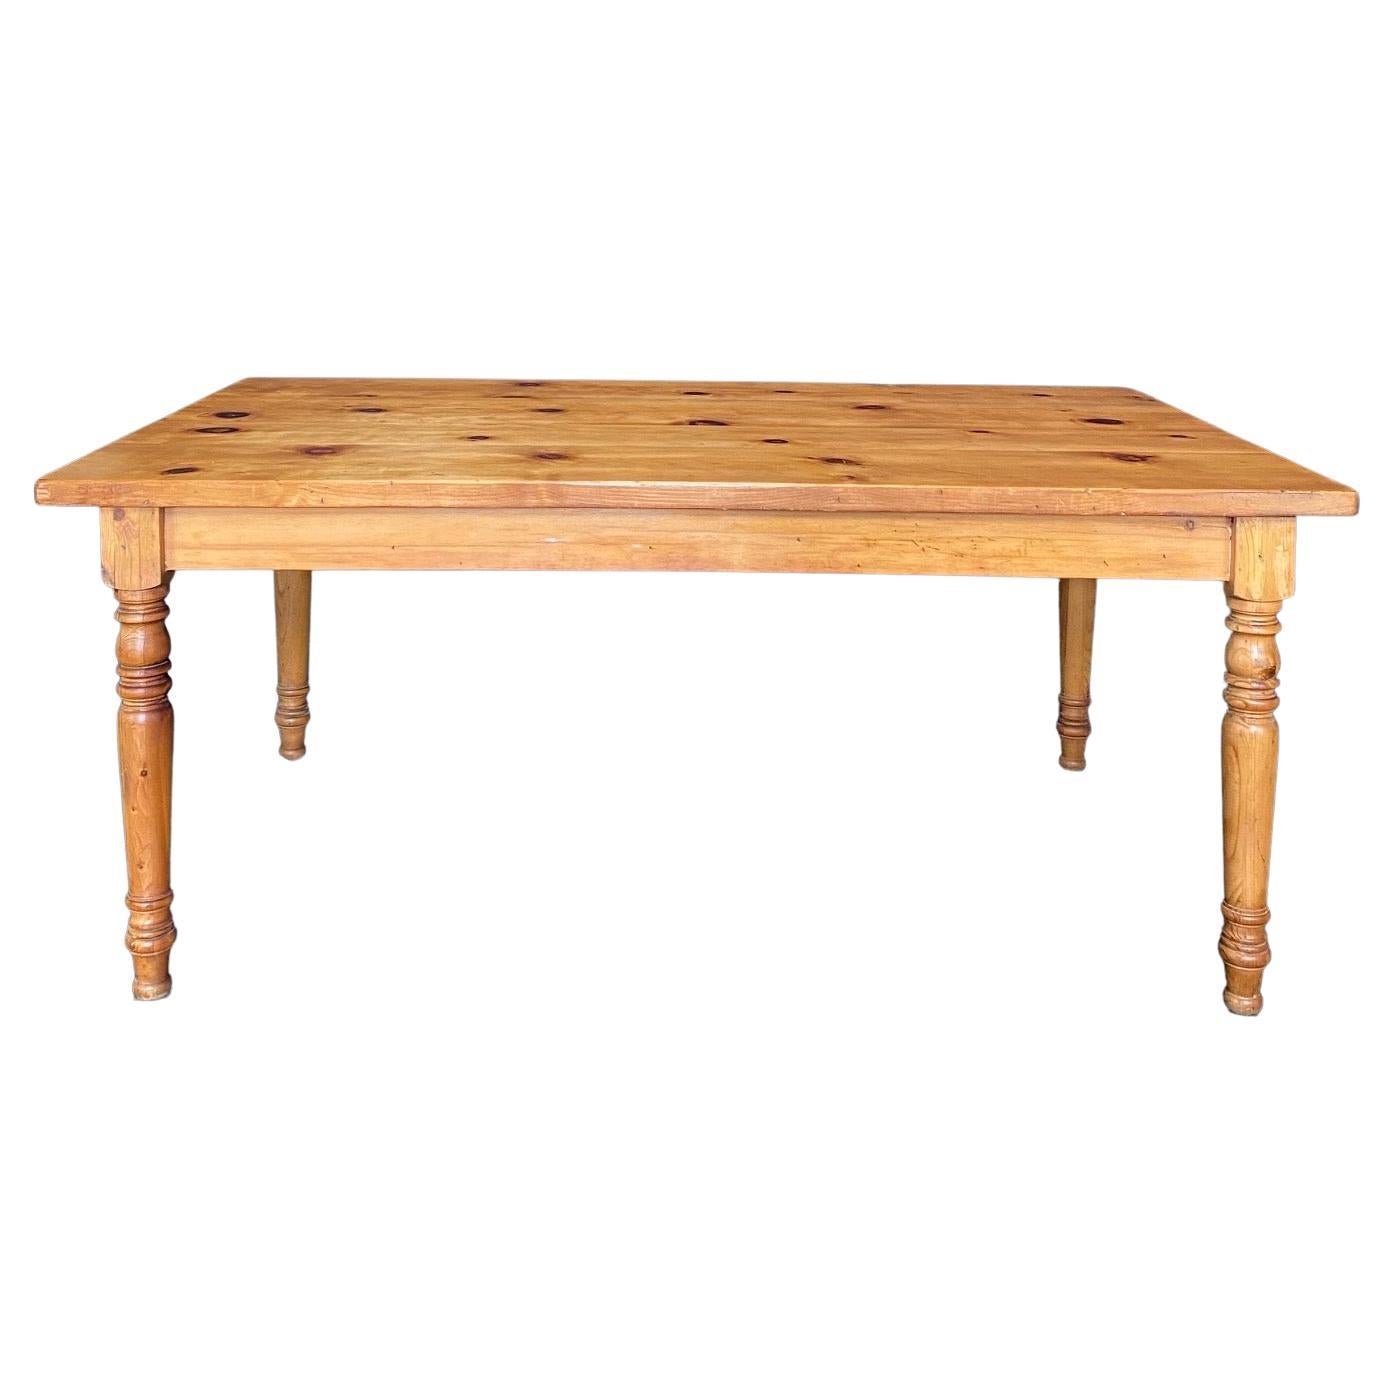 Charming & Welcoming British Country Antique Pine Farmhouse Dining Table